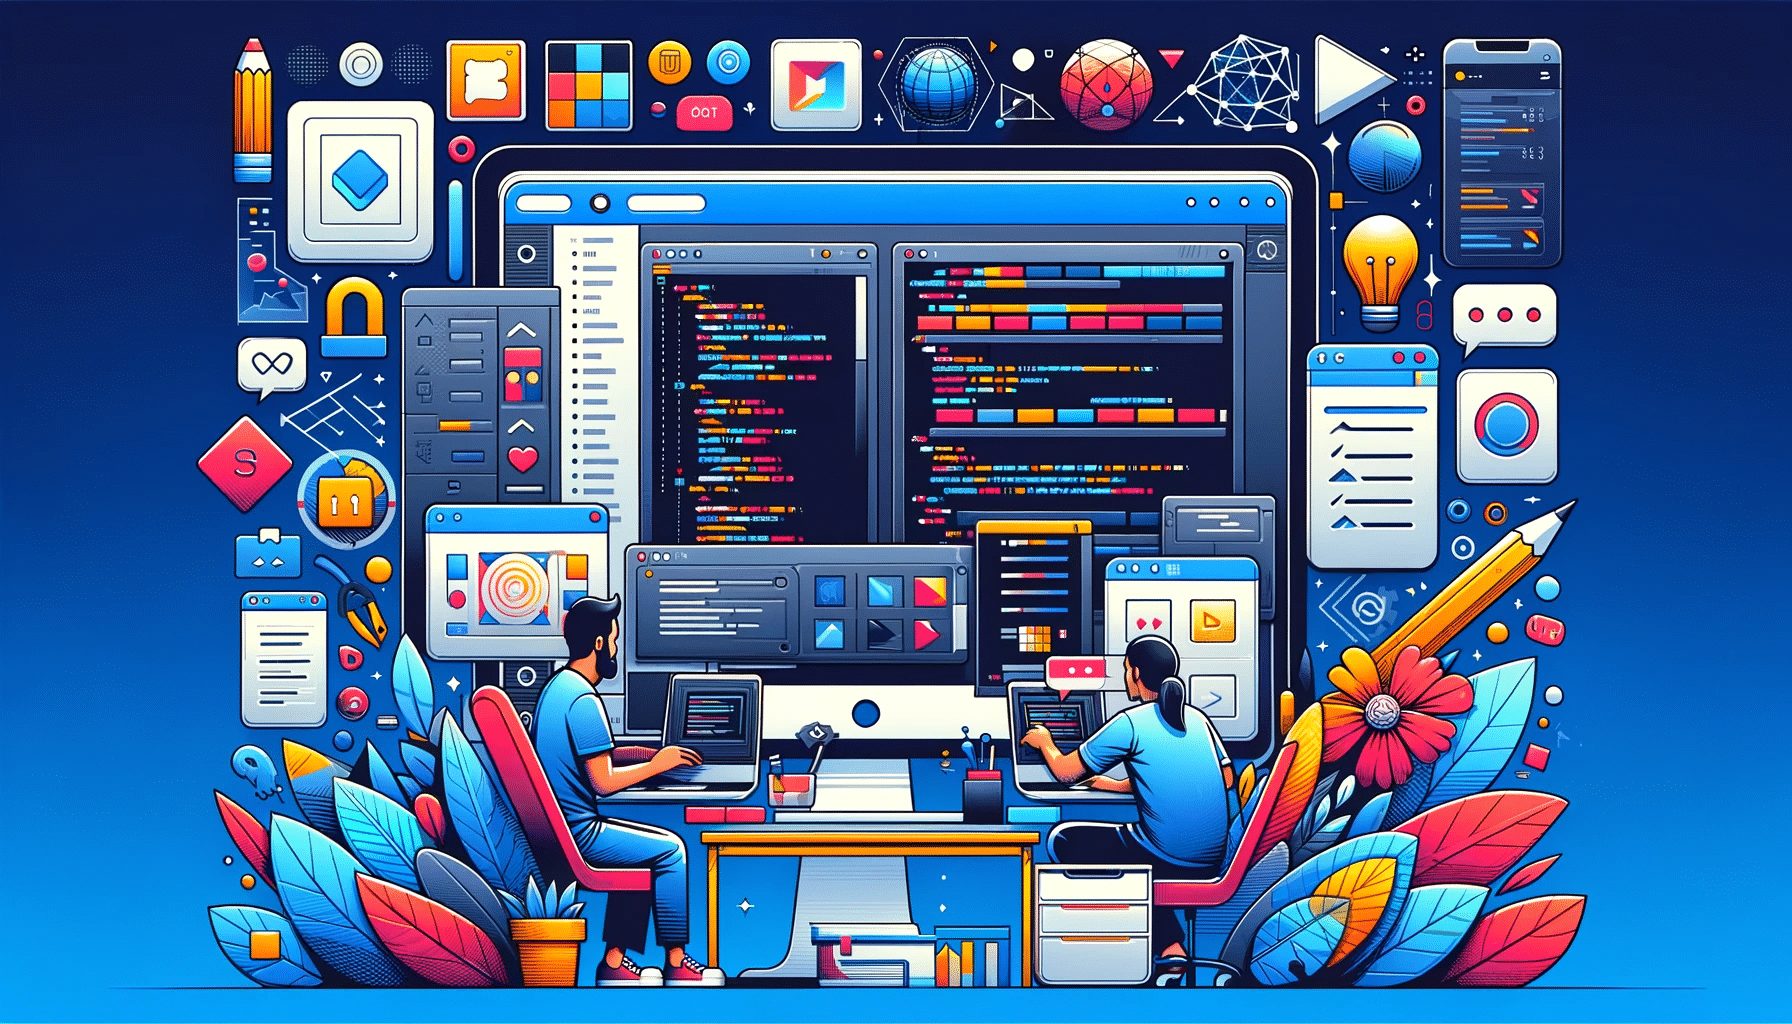 The image depicts two people engaged in programming, surrounded by vivid, stylized tech and design icons, creating a dynamic, colorful illustration of software development.